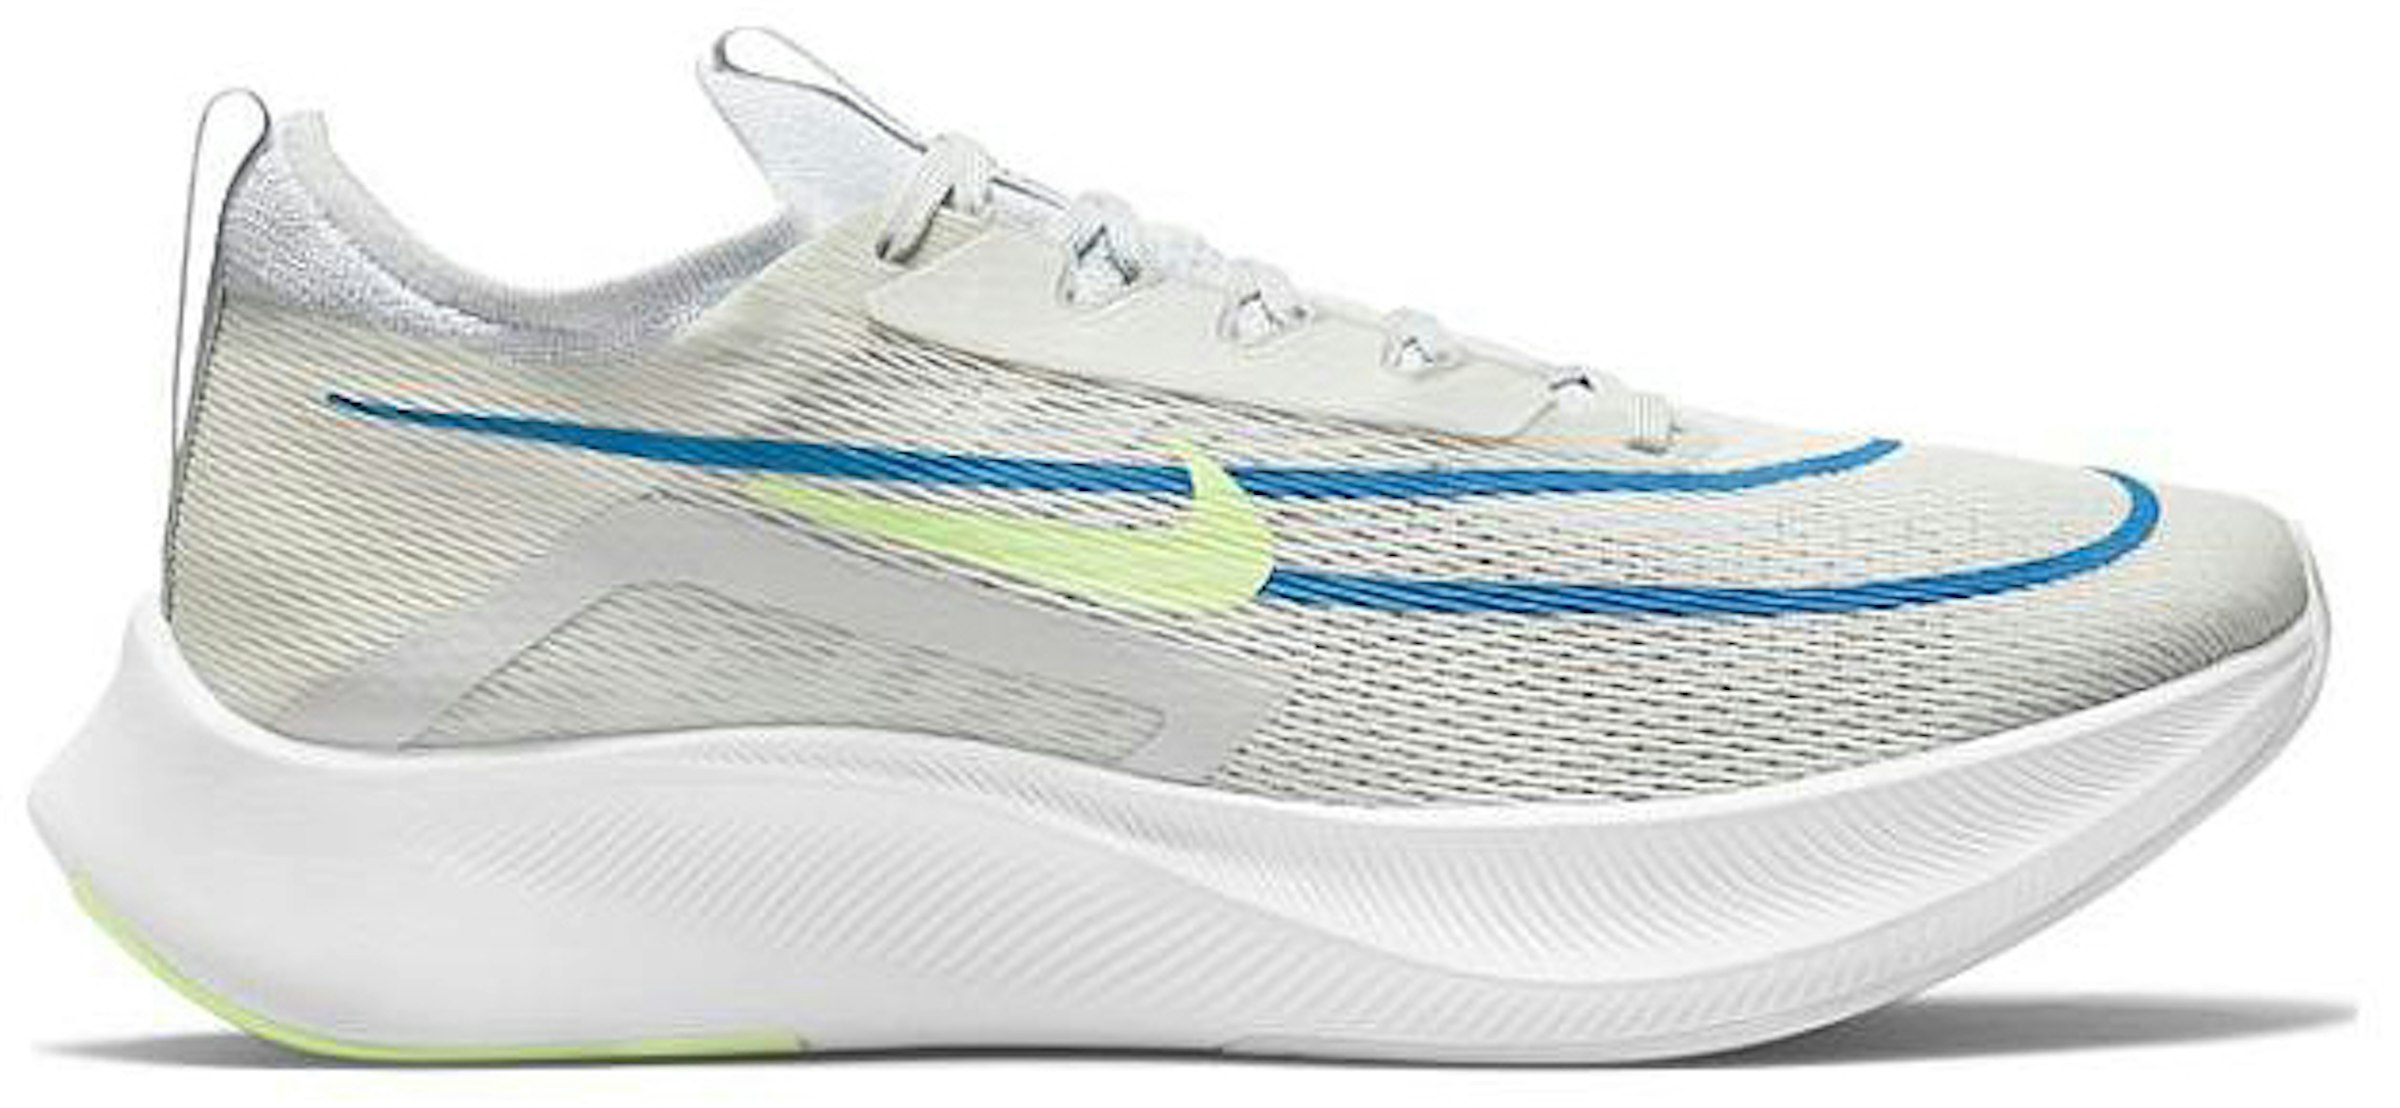 Nike Zoom Fly 4 Summit White Blue Lime Glow Men's - CT2392-100